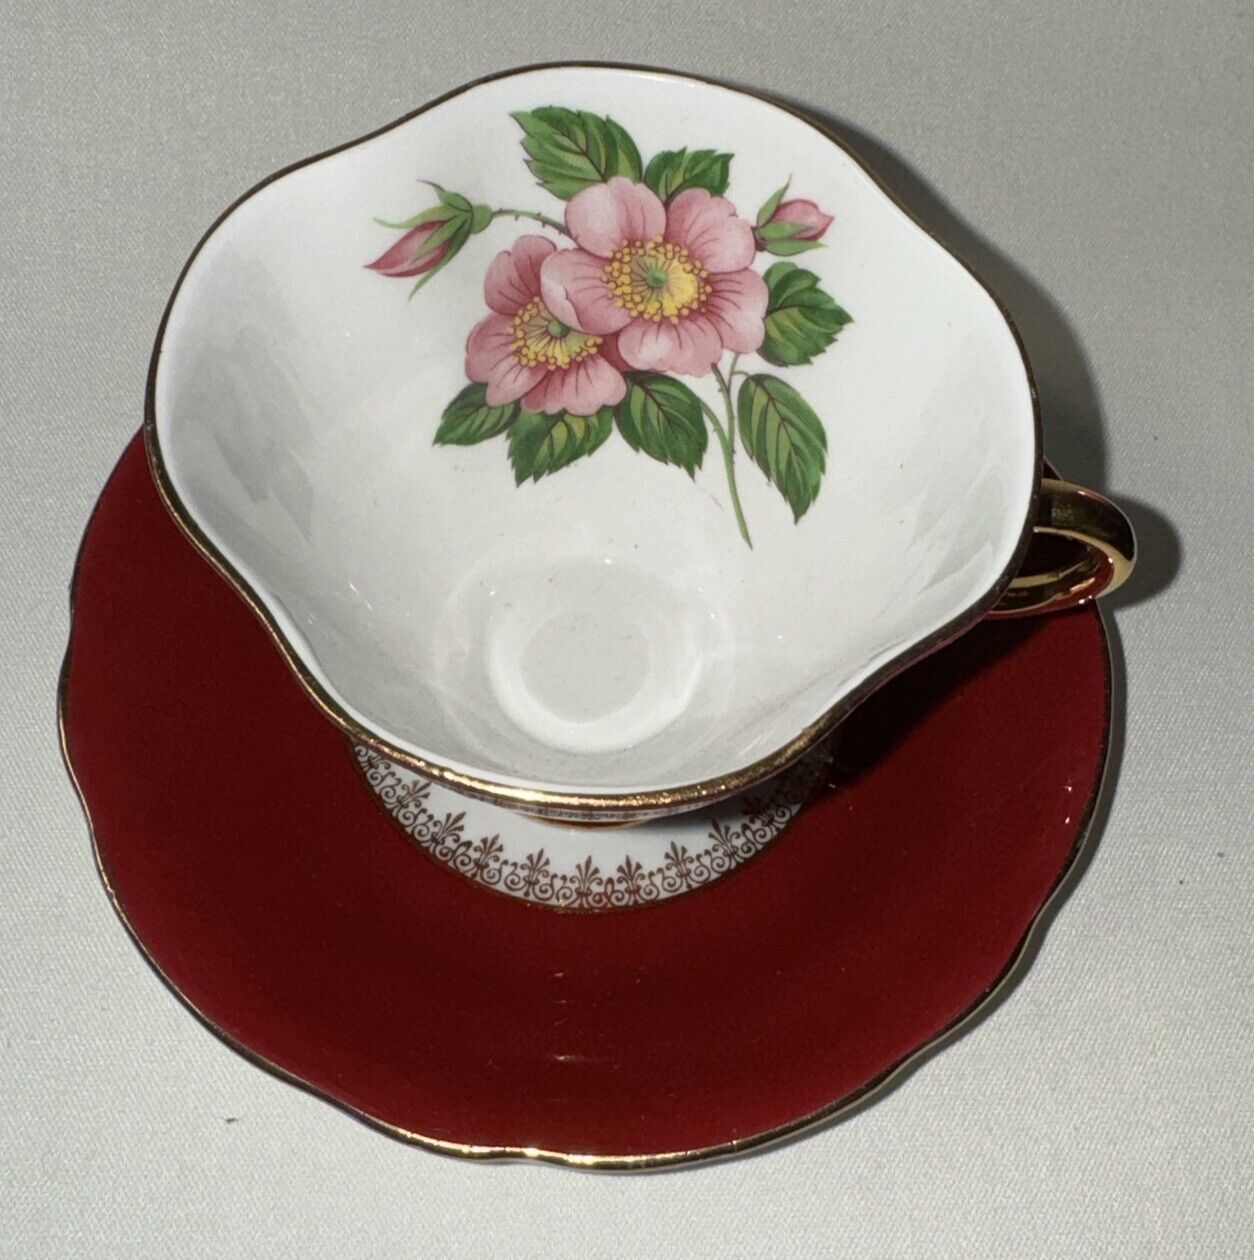 Maroon Clarence China Teacup & Saucer with Pink Anemone Flower / Made In England